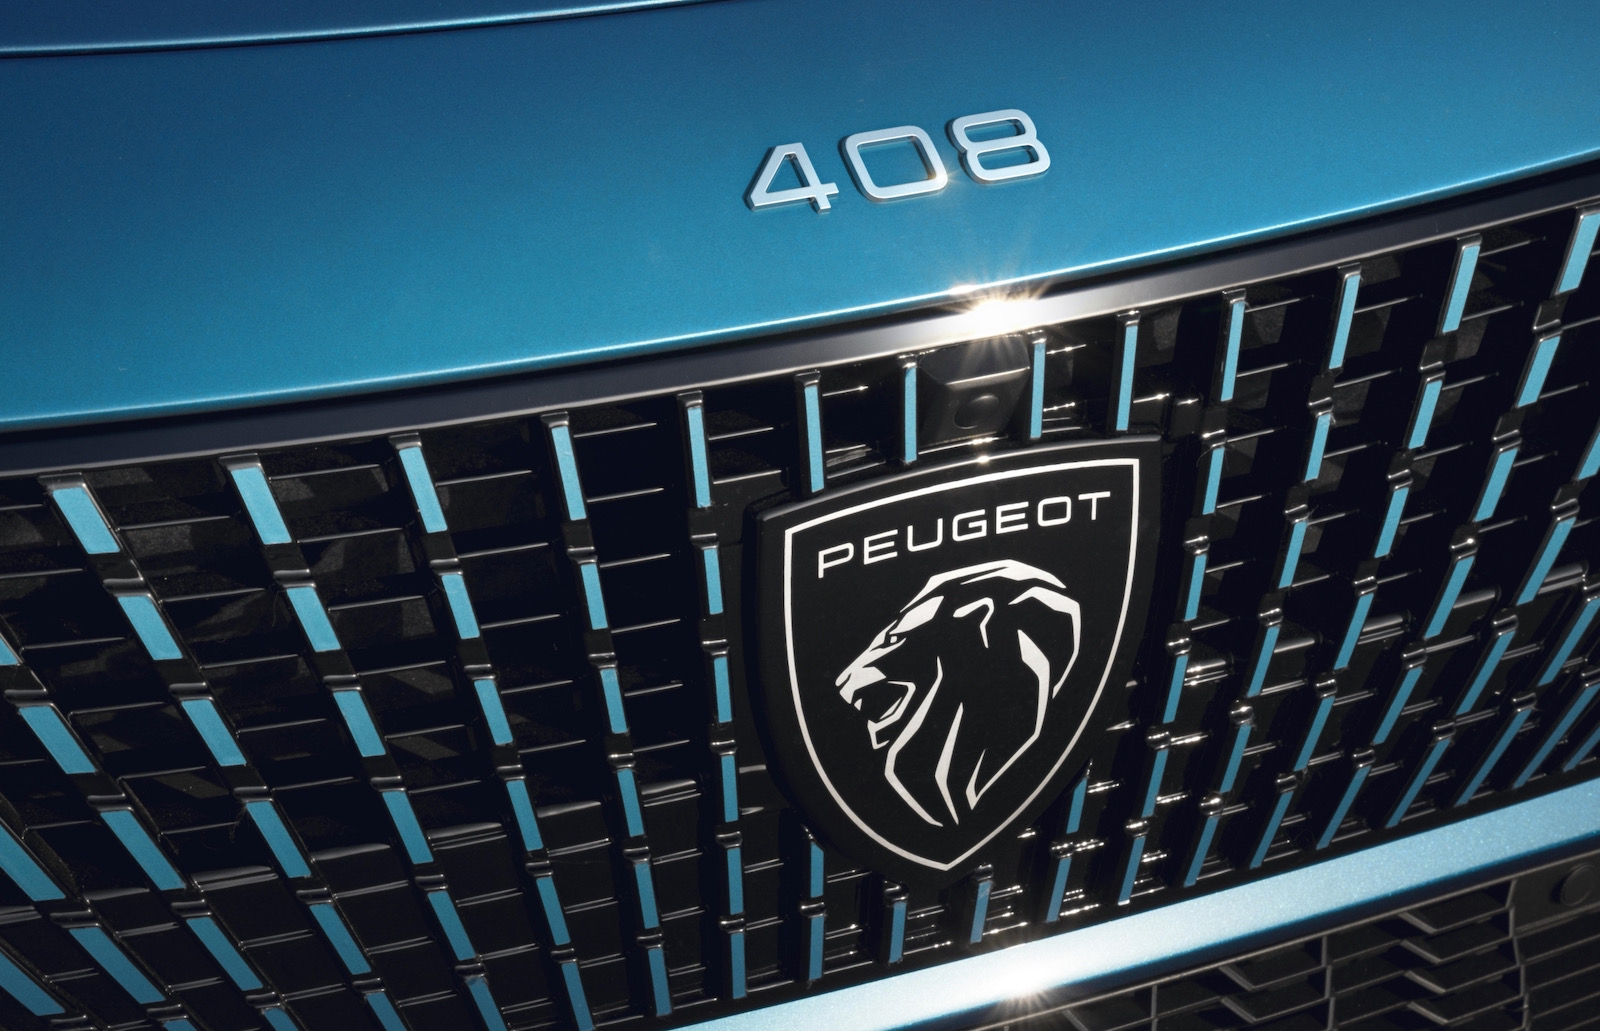 All-new Peugeot 408 coupe-style SUV confirmed, debuts late June